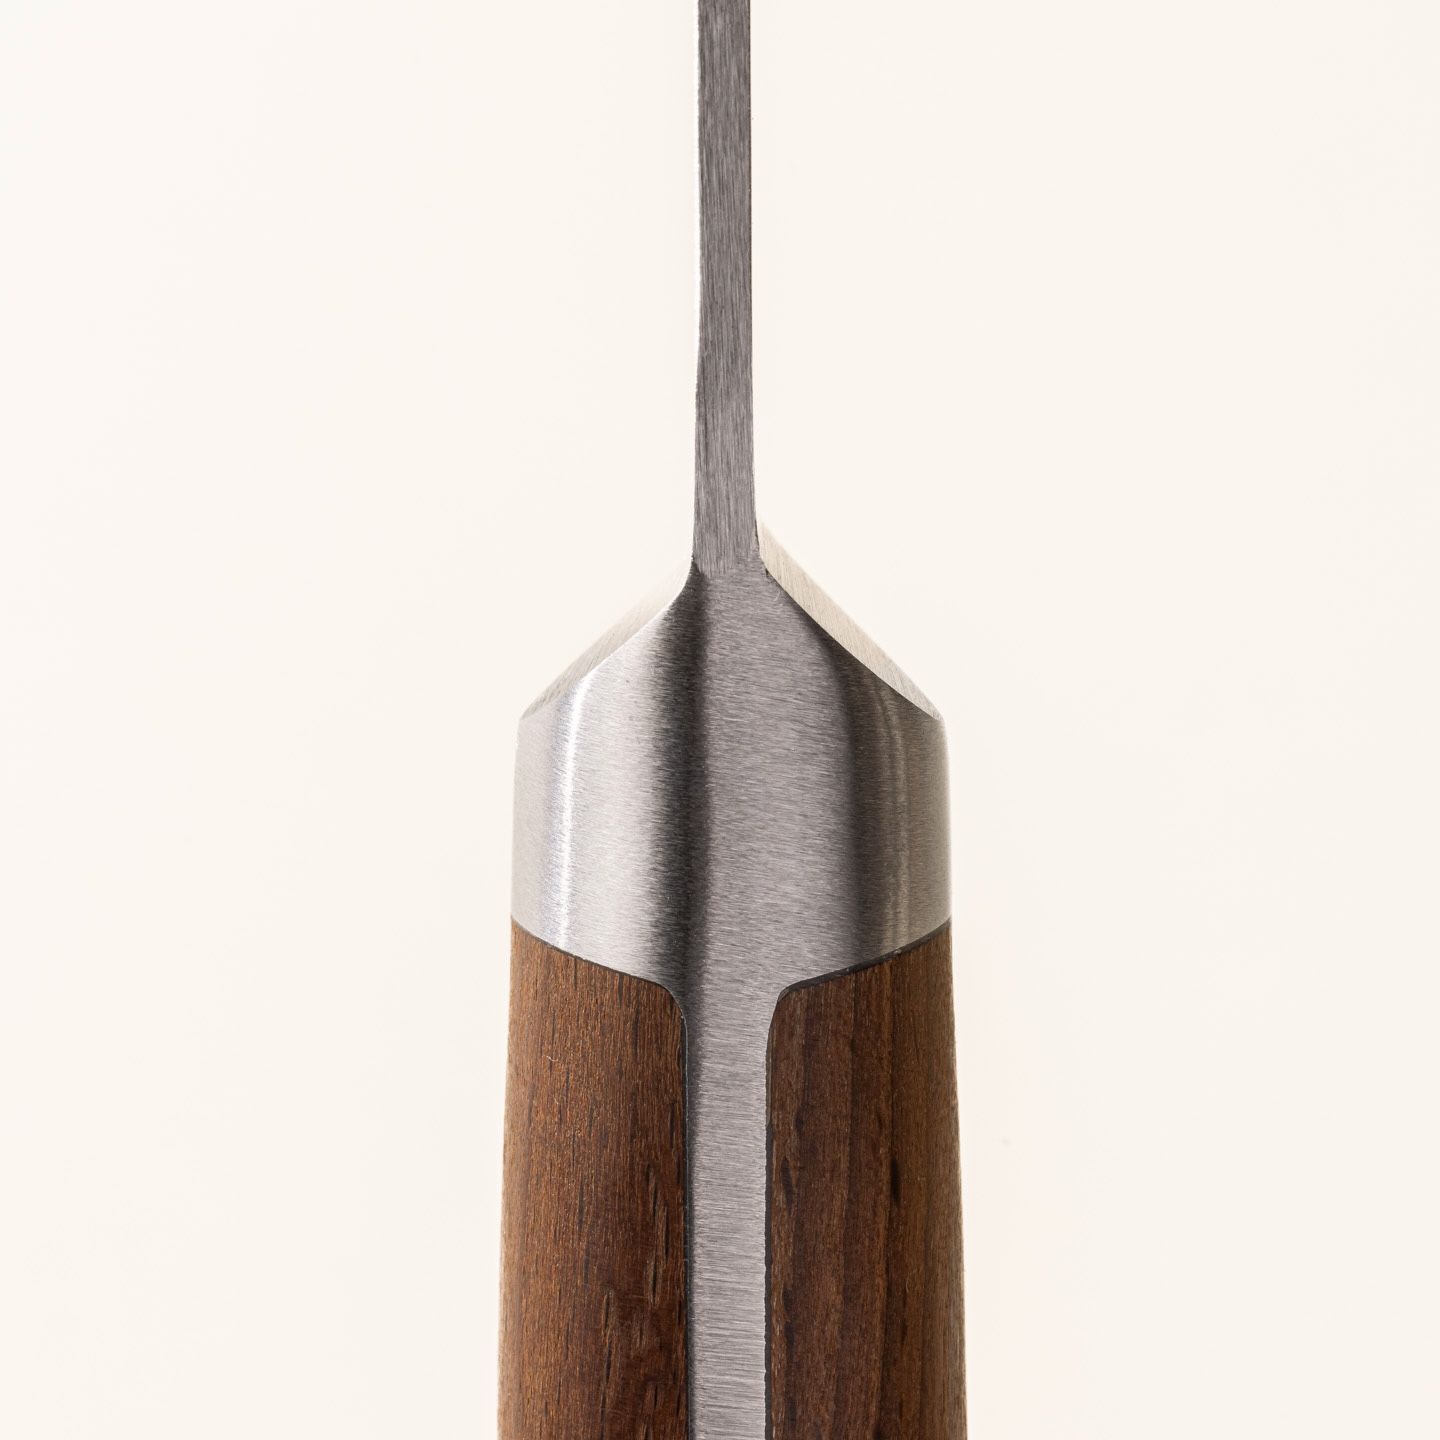 A close up of where the wooden handle meets the steel blade of a paring knife